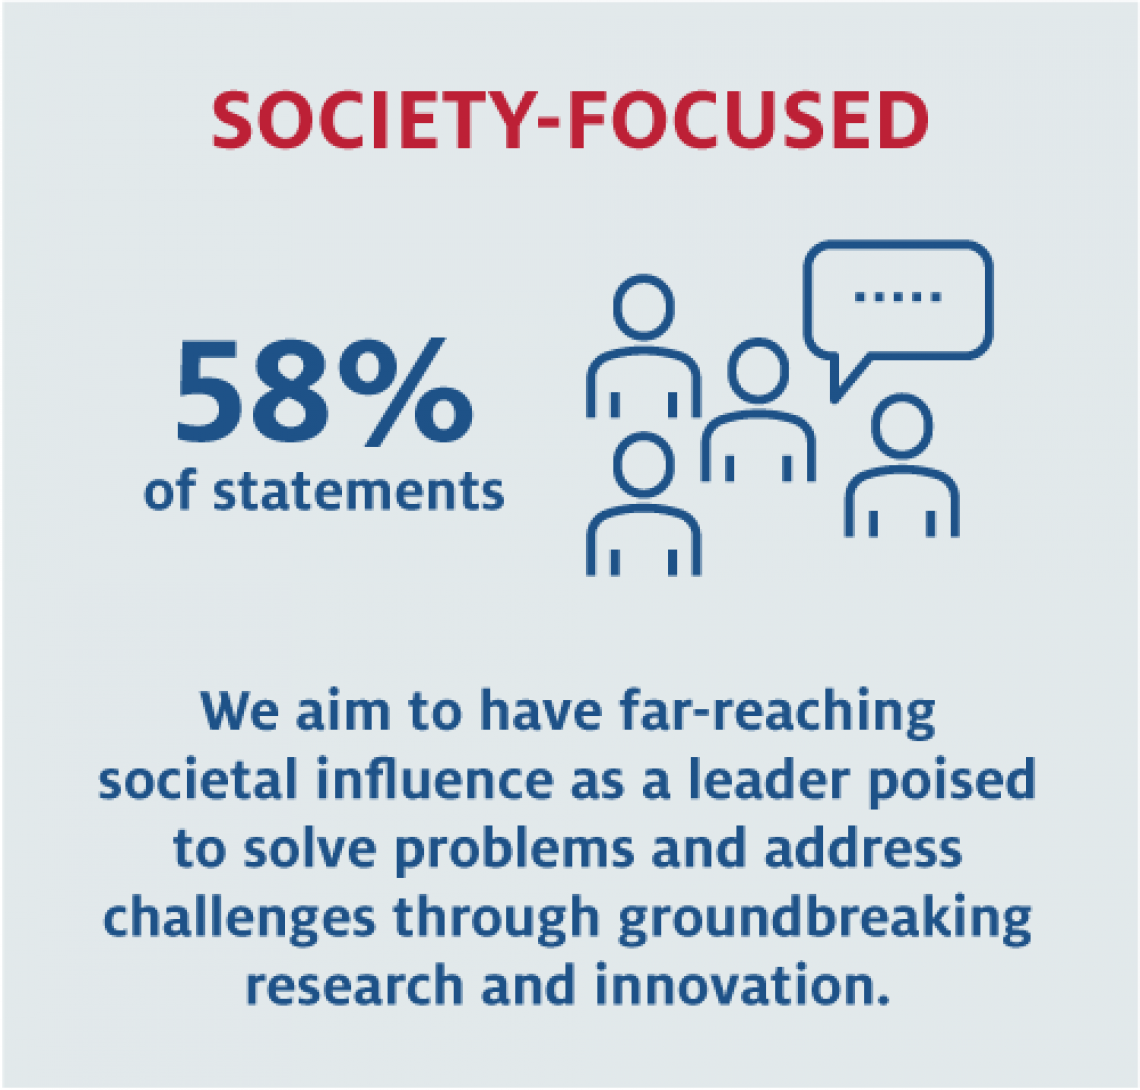 58% of statements society-focused